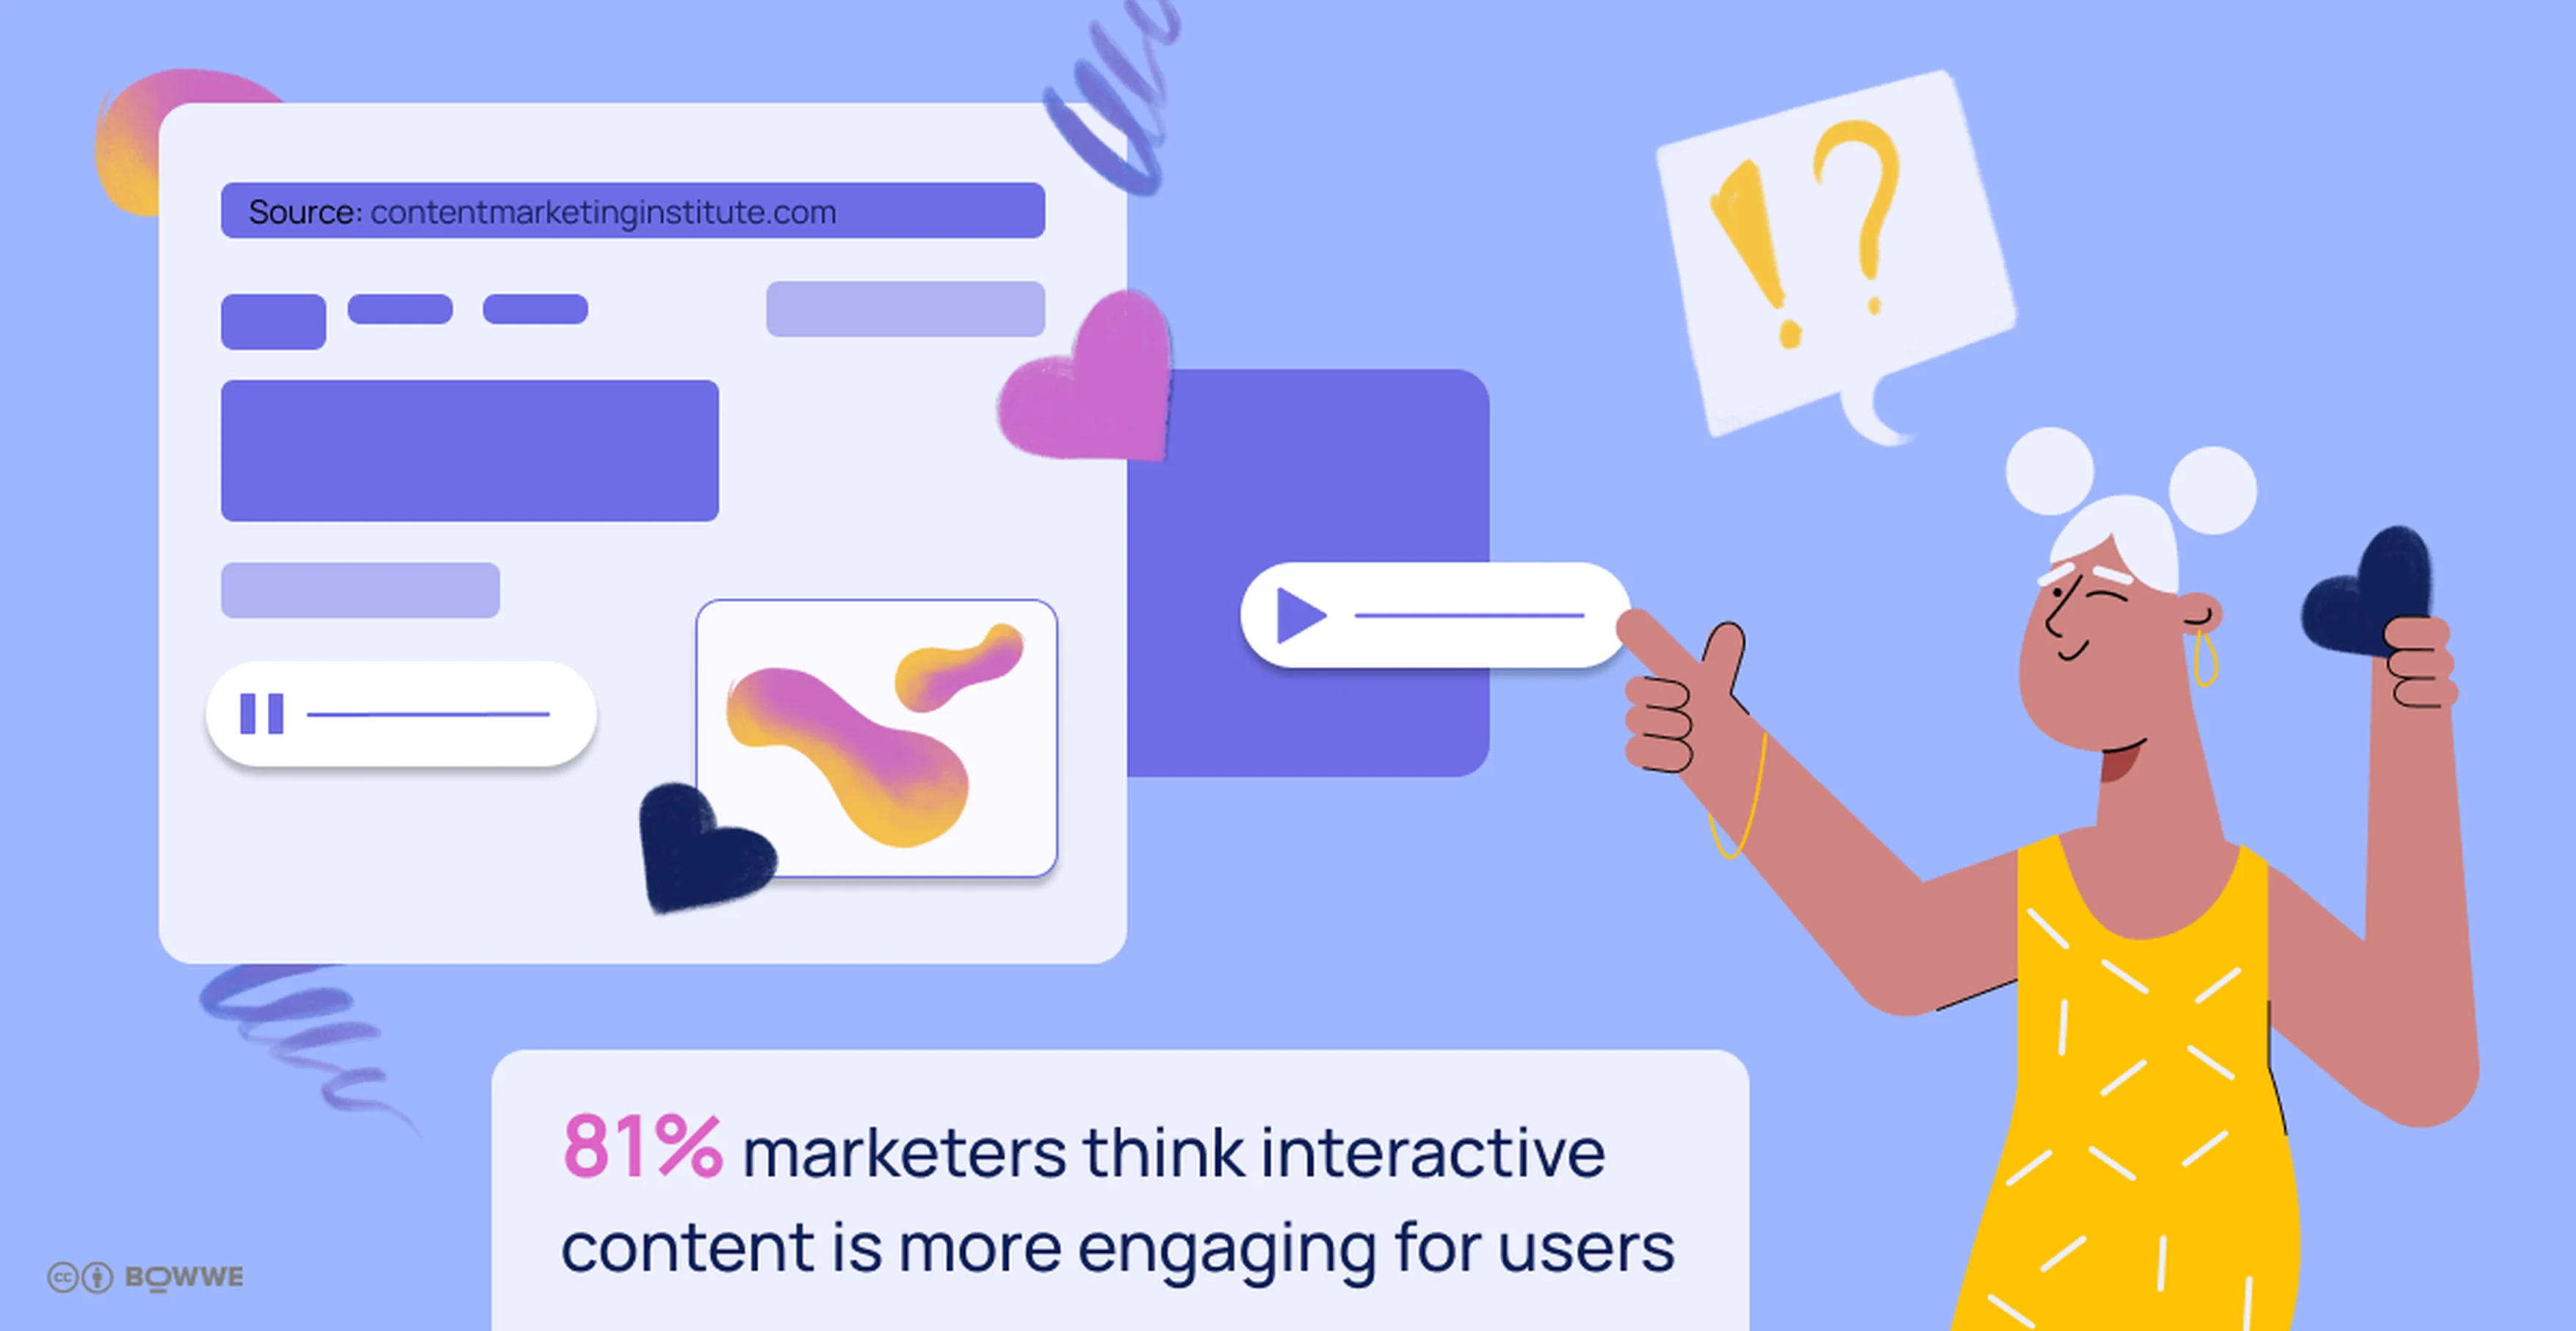 Yellow and green graphic with the text "81% marketers think interactive content is more engaging for users" and an eye graphic